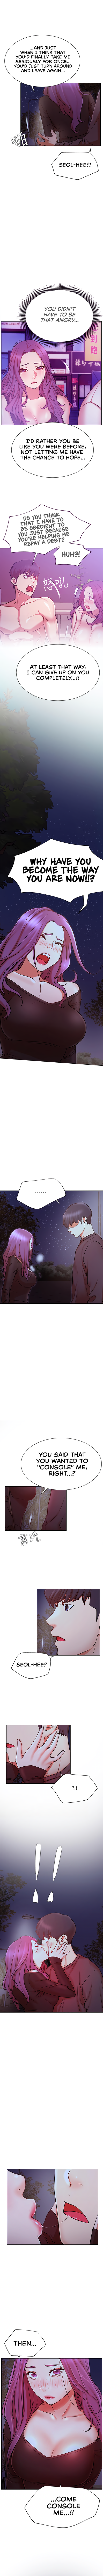 do-you-want-to-collab-chap-35-5